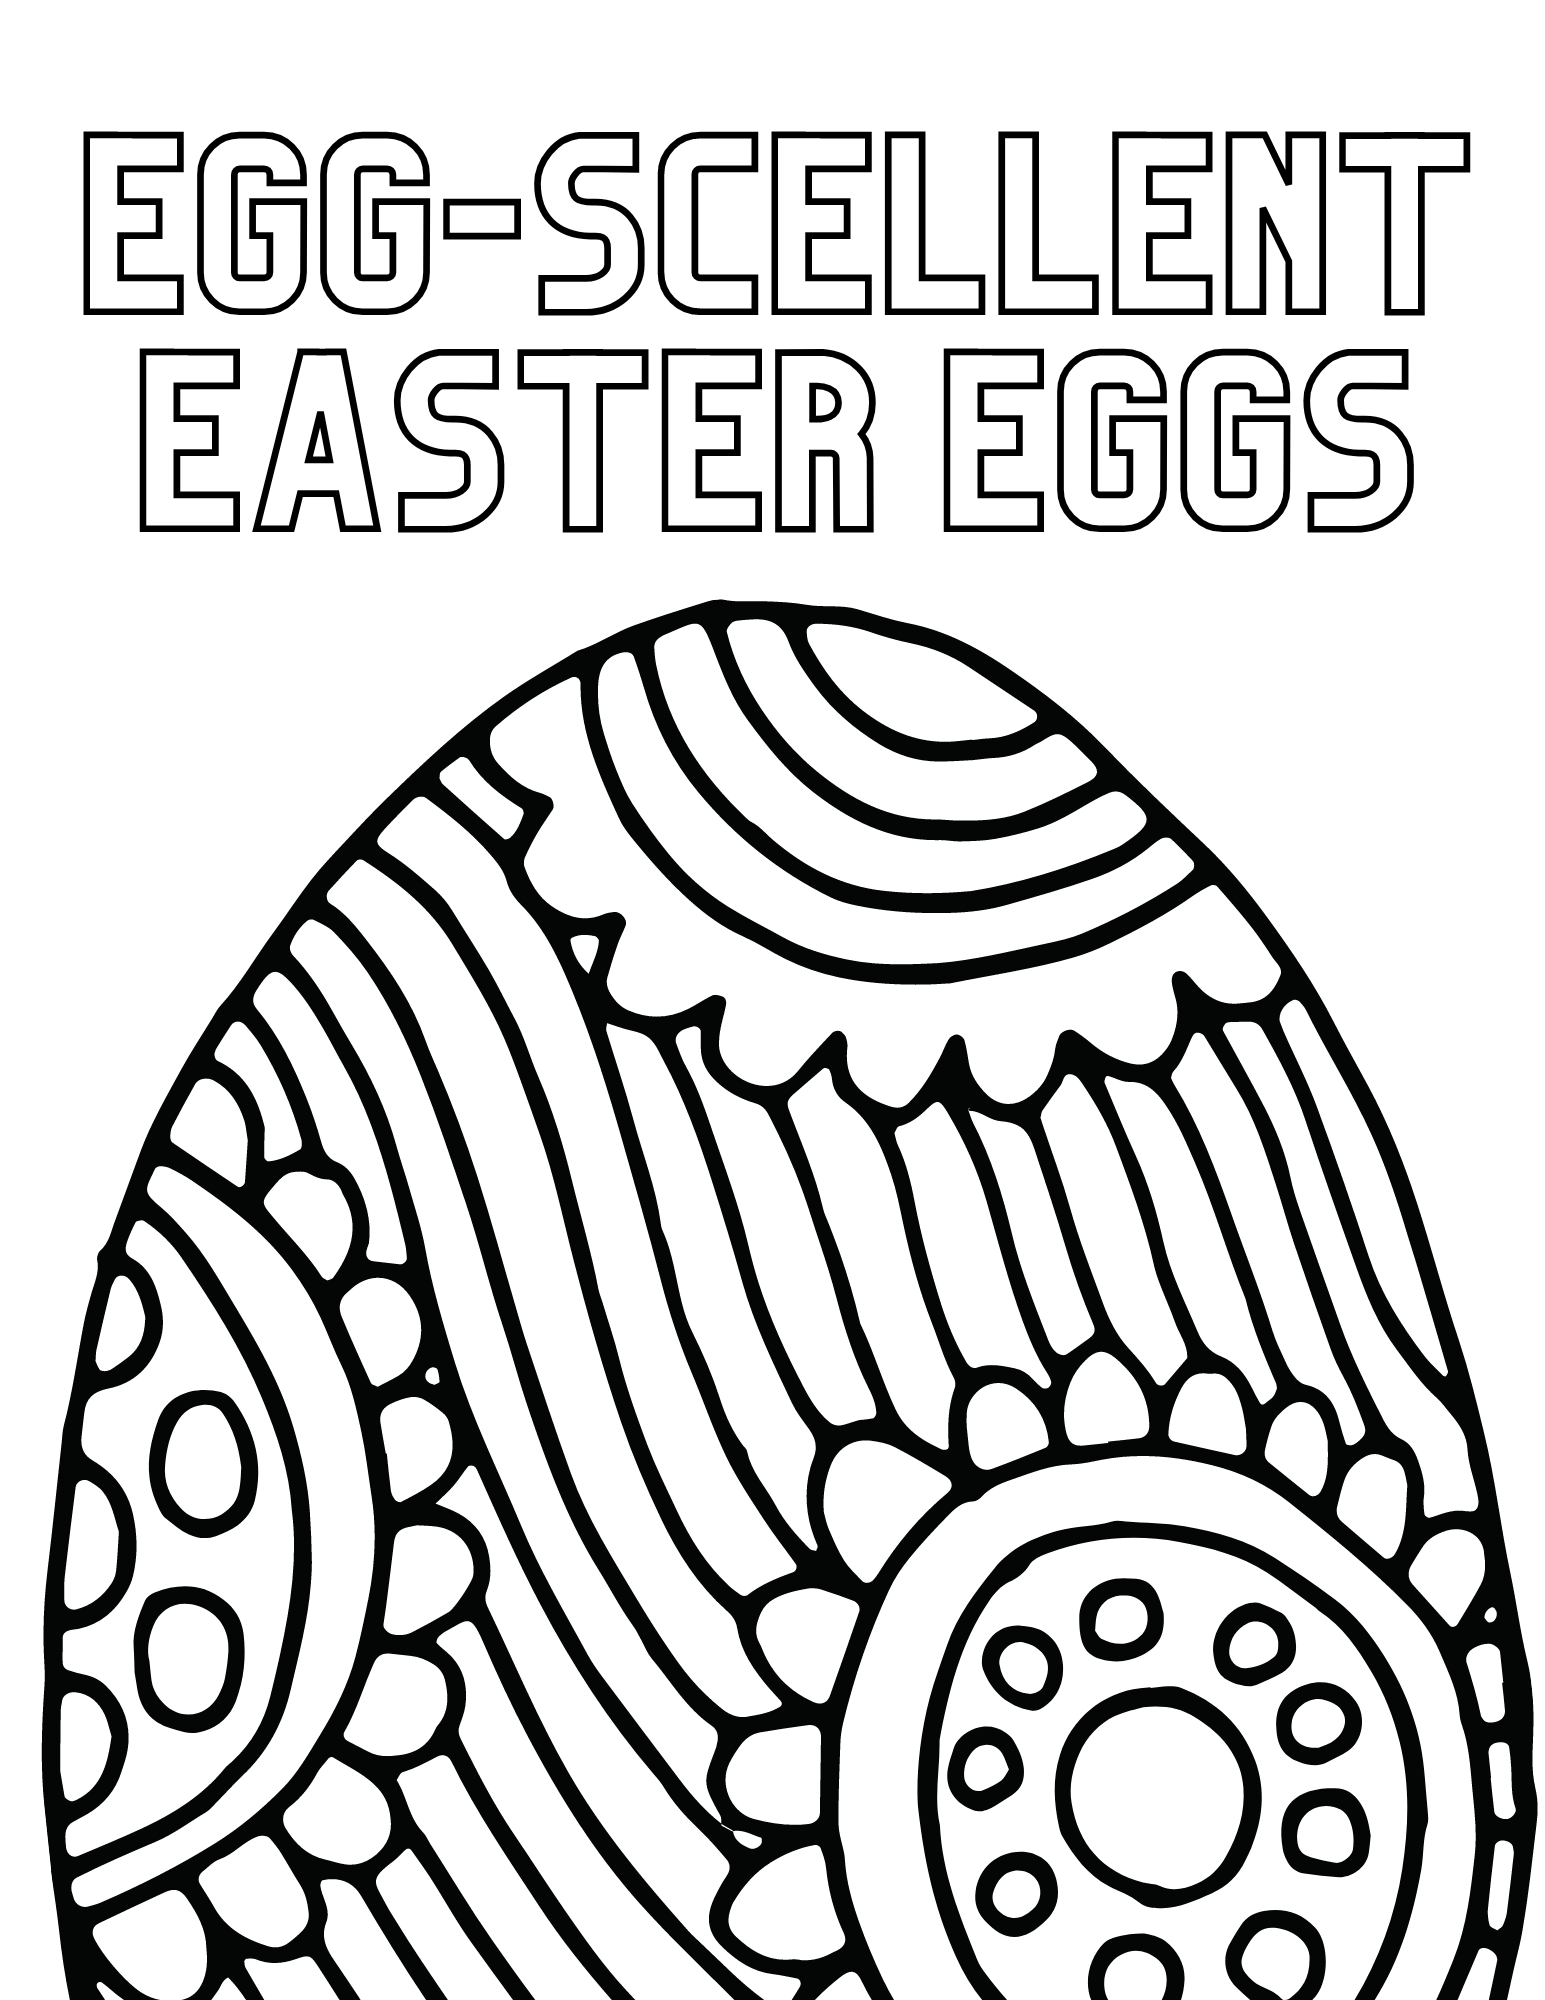 Egg-scellent Easter Egg Coloring Pages for Kids and Adults